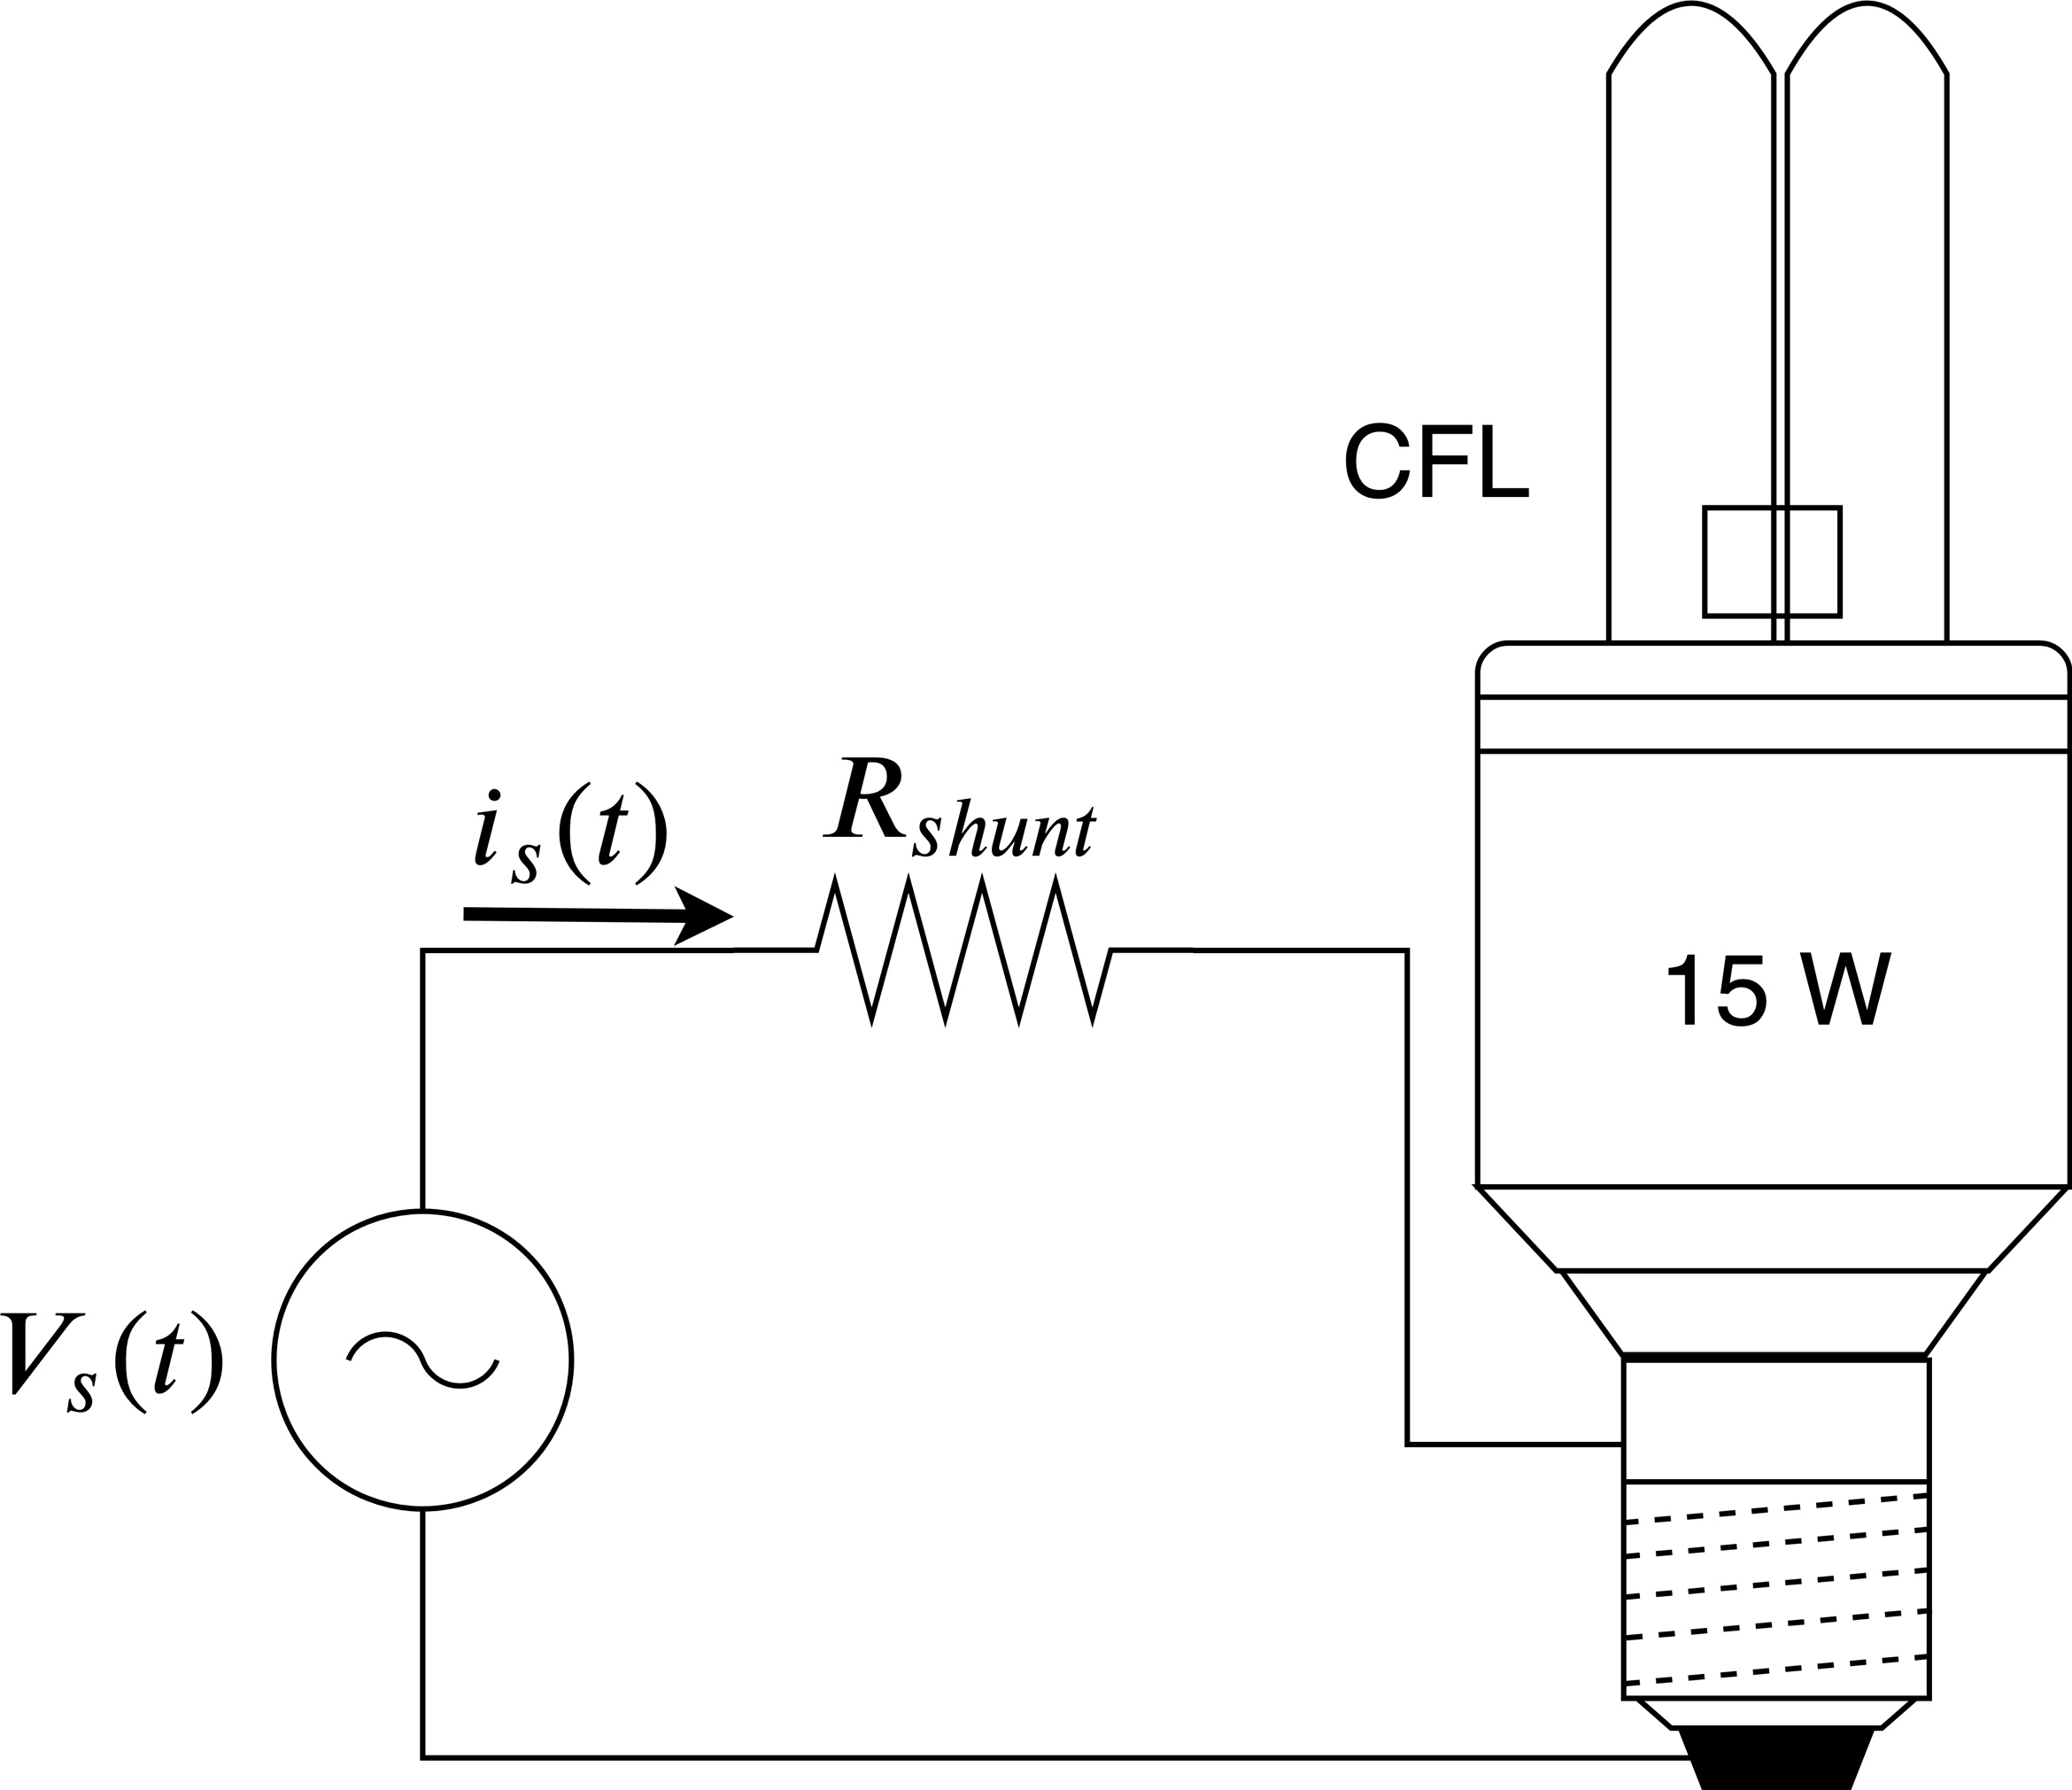 Schematic block diagram of a CFL connected to the line voltage with a shunt resistor Rshunt for current measurement.